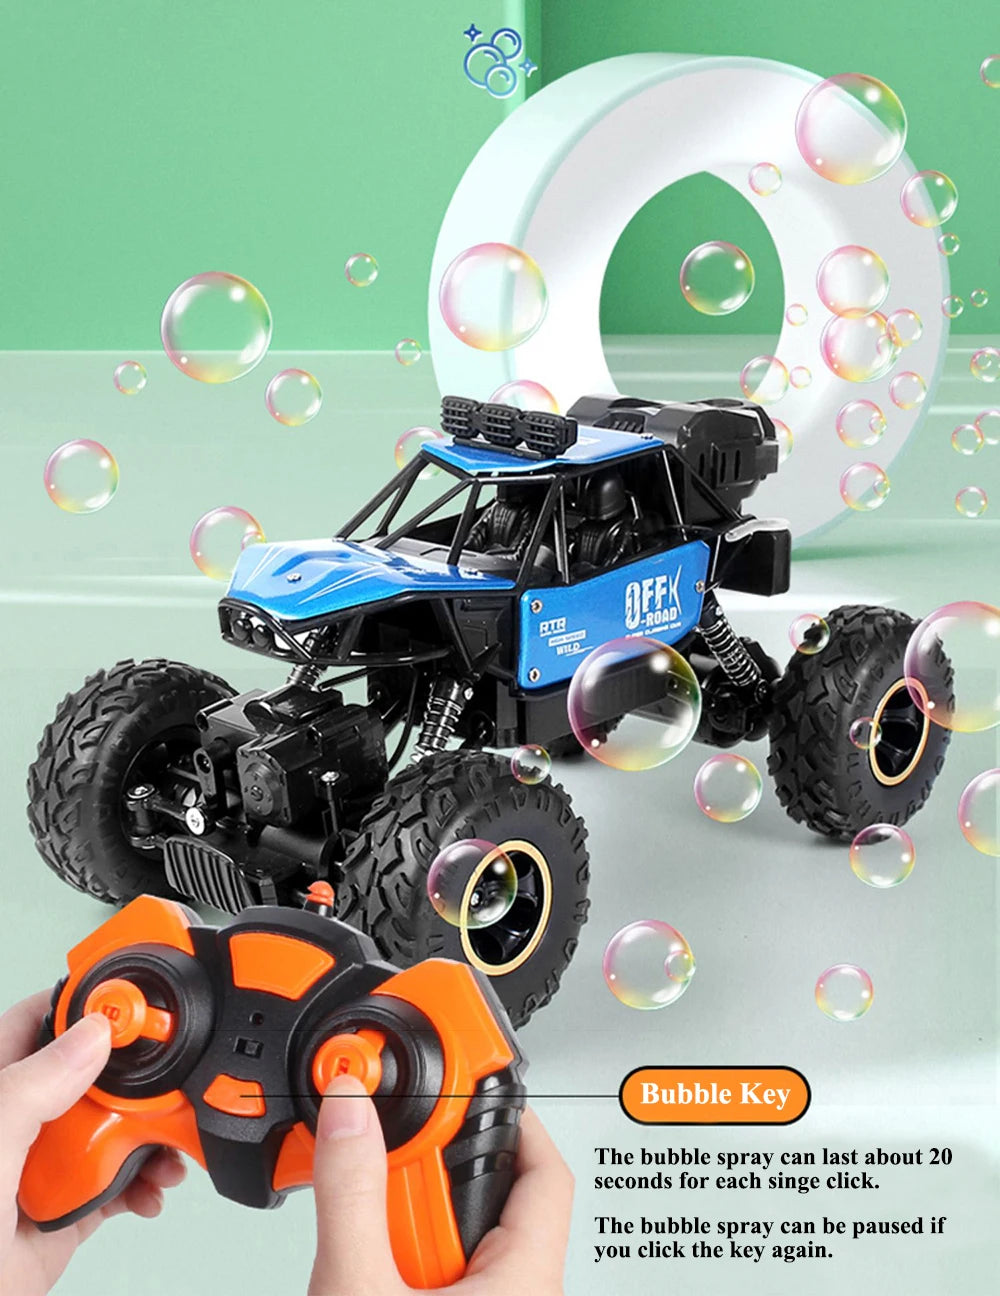 Paisible 4WD RC Car, the bubble can be paused if you click the key during the spraying